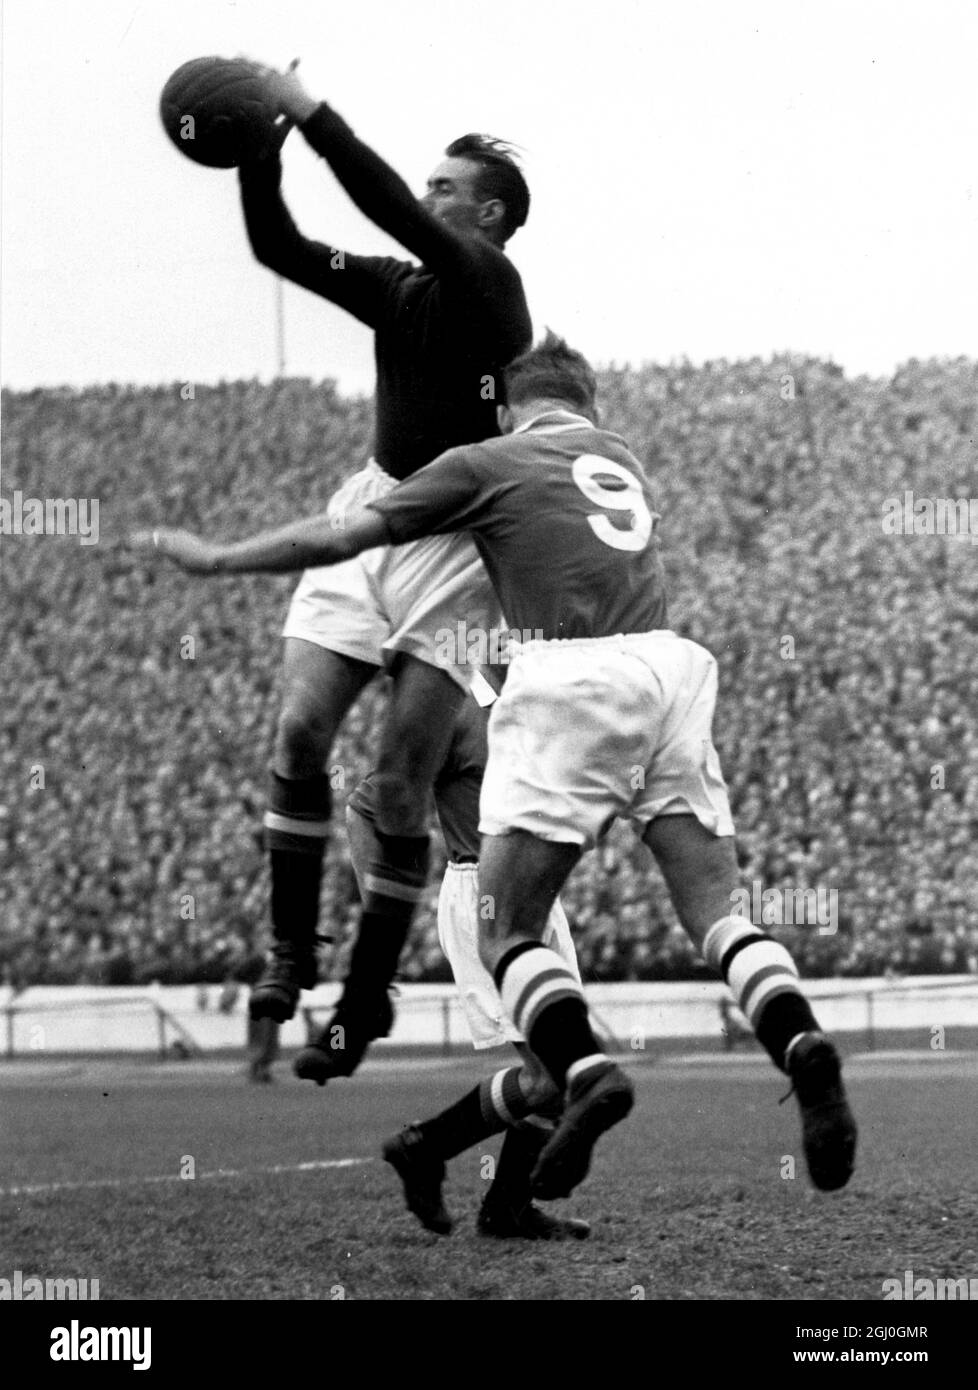 Chelsea v Manchester United A brilliant save by Manchester United goalkeeper, Wood, when under heavy attacking pressure from Chelsea forward, Roy Bentley. Manchester's centre-half, Chilton, the captain, anxiously assists Wood to clear during the match at Stamford Bridge. 16th October 1954 Stock Photo